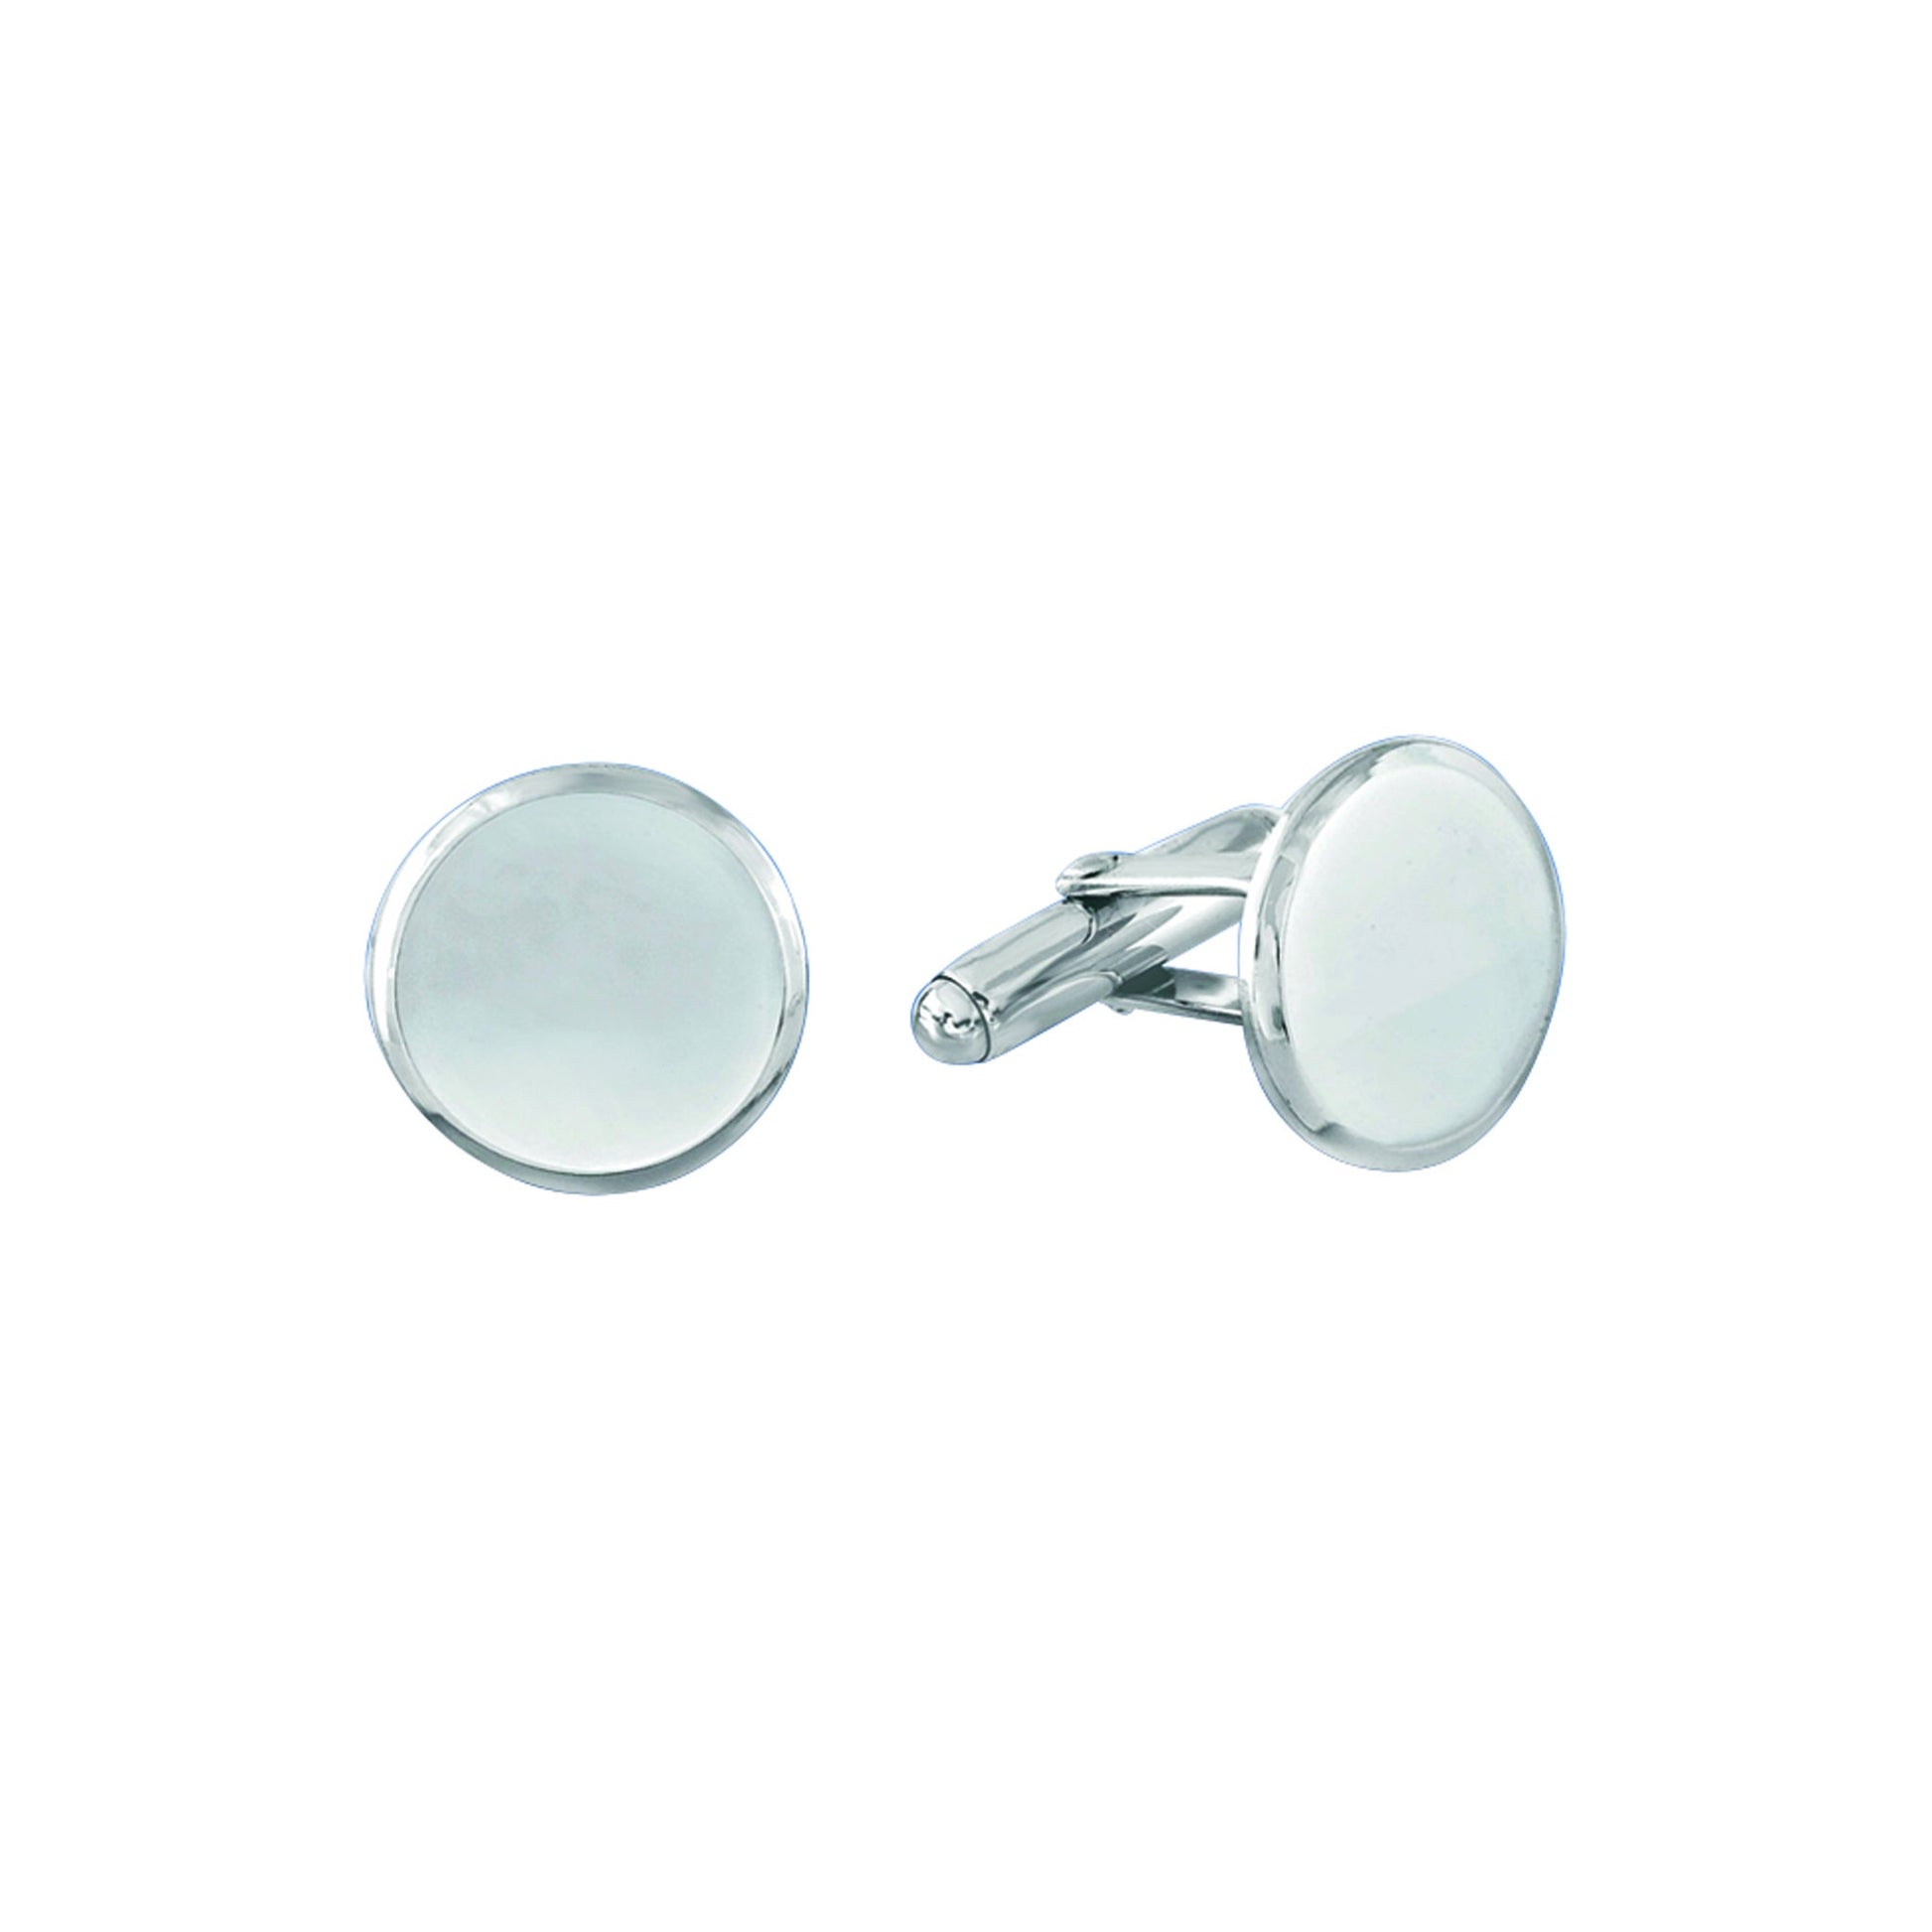 A sterling silver polished cufflinks with bevel edge displayed on a neutral white background.